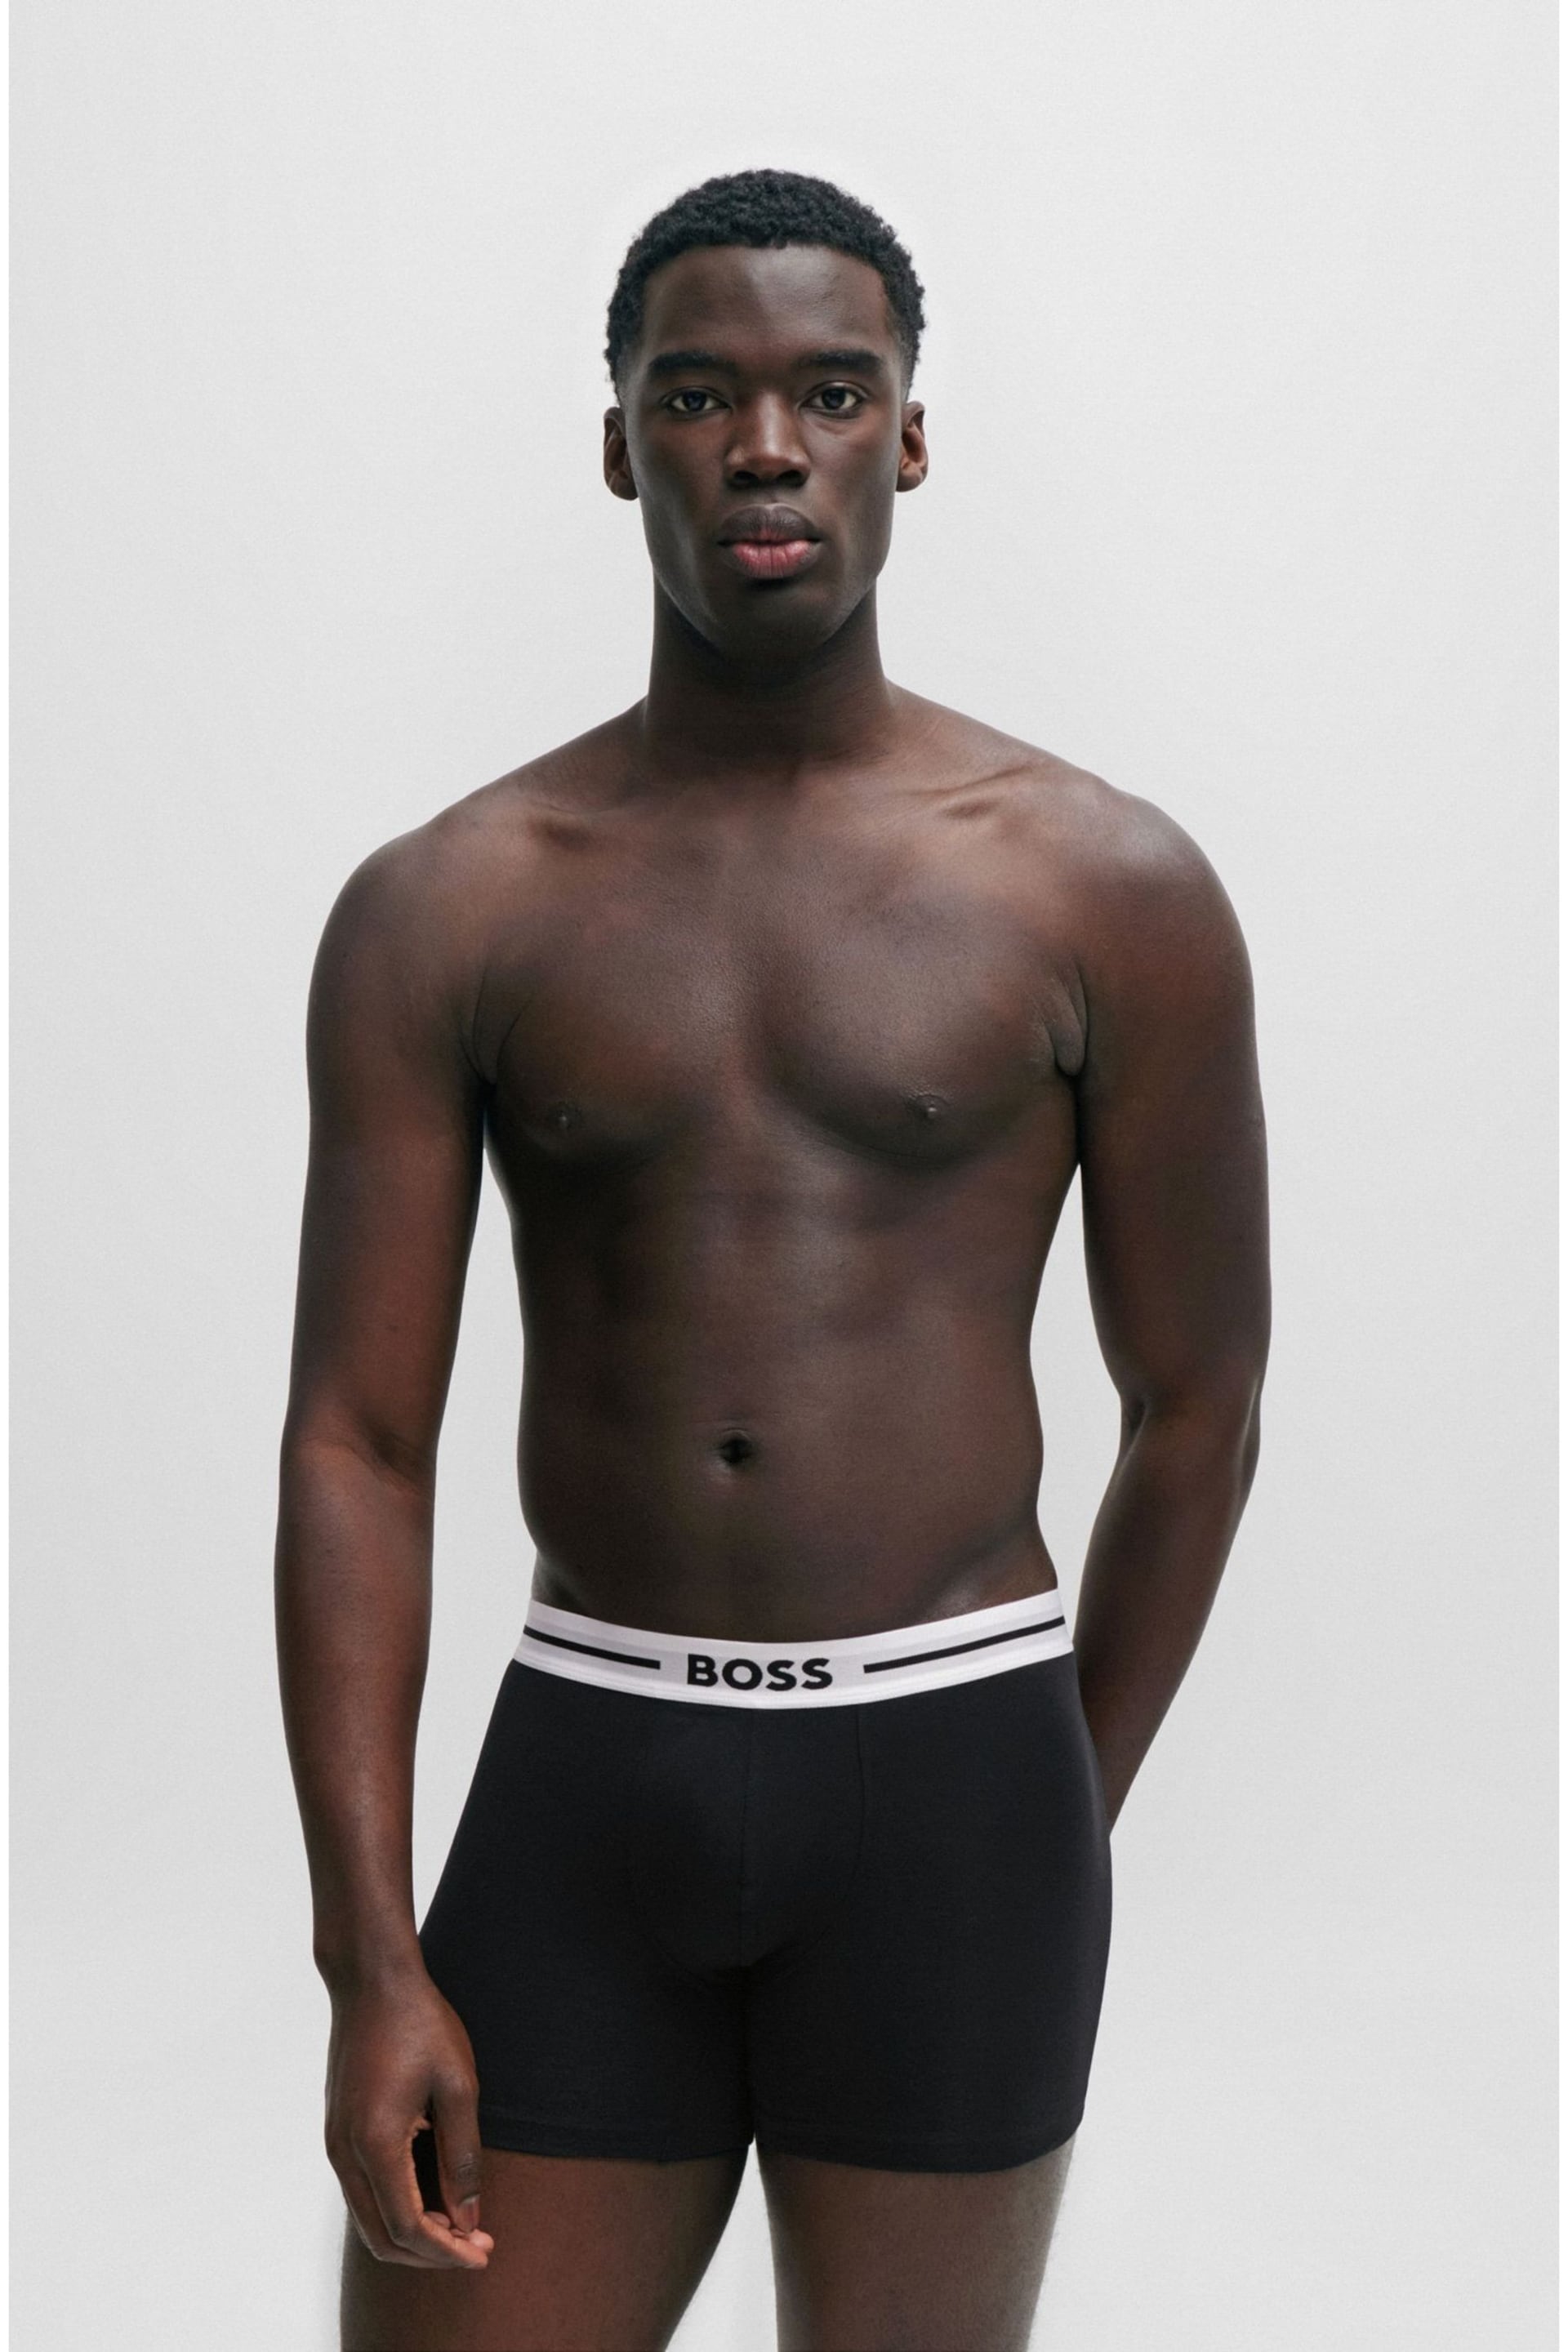 BOSS Black Stretch-Cotton Boxer Briefs 3 Pack With Logos - Image 5 of 7